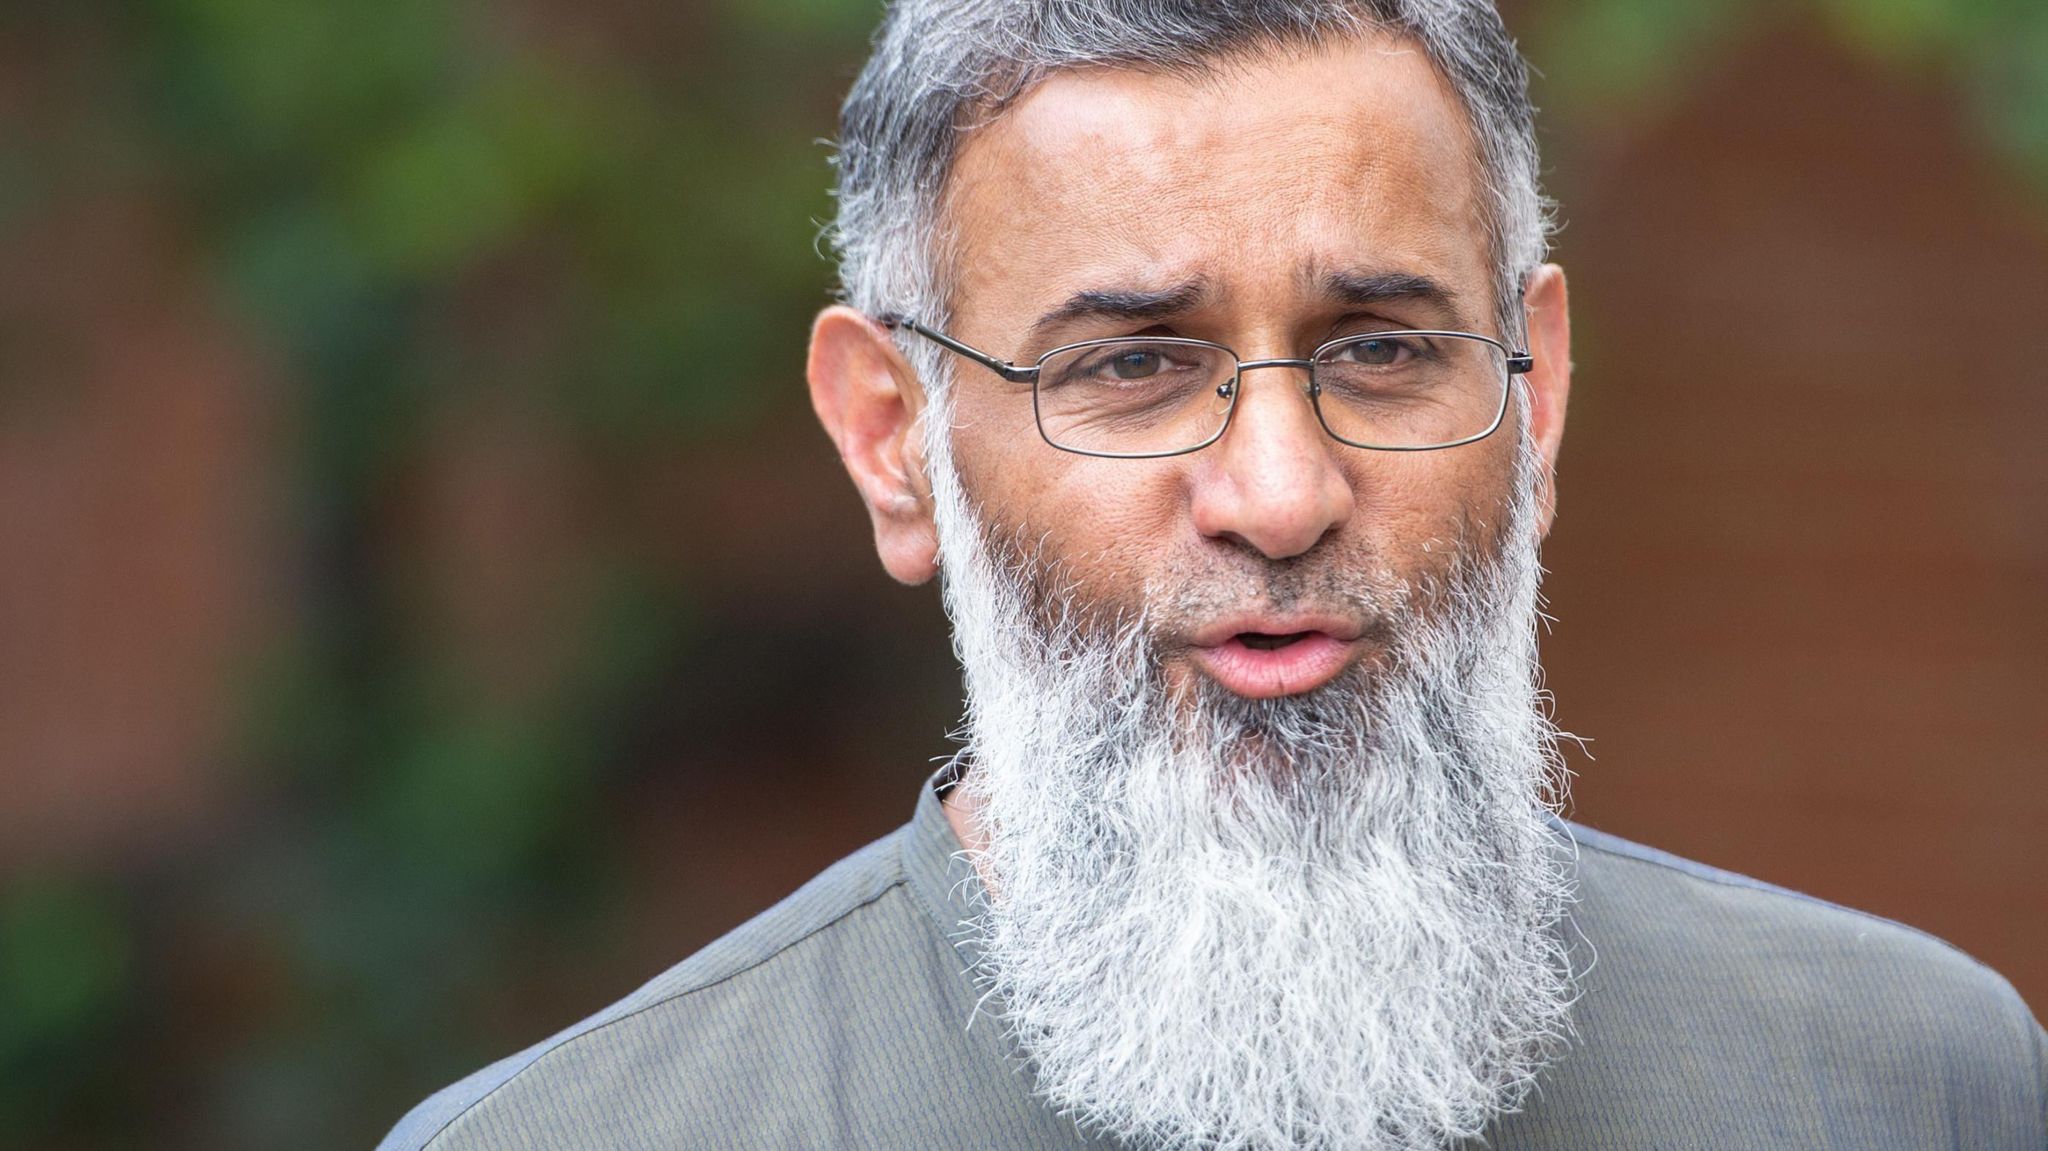 A close up head shot of Anjem Choudary when he was speaking to the media in 2021